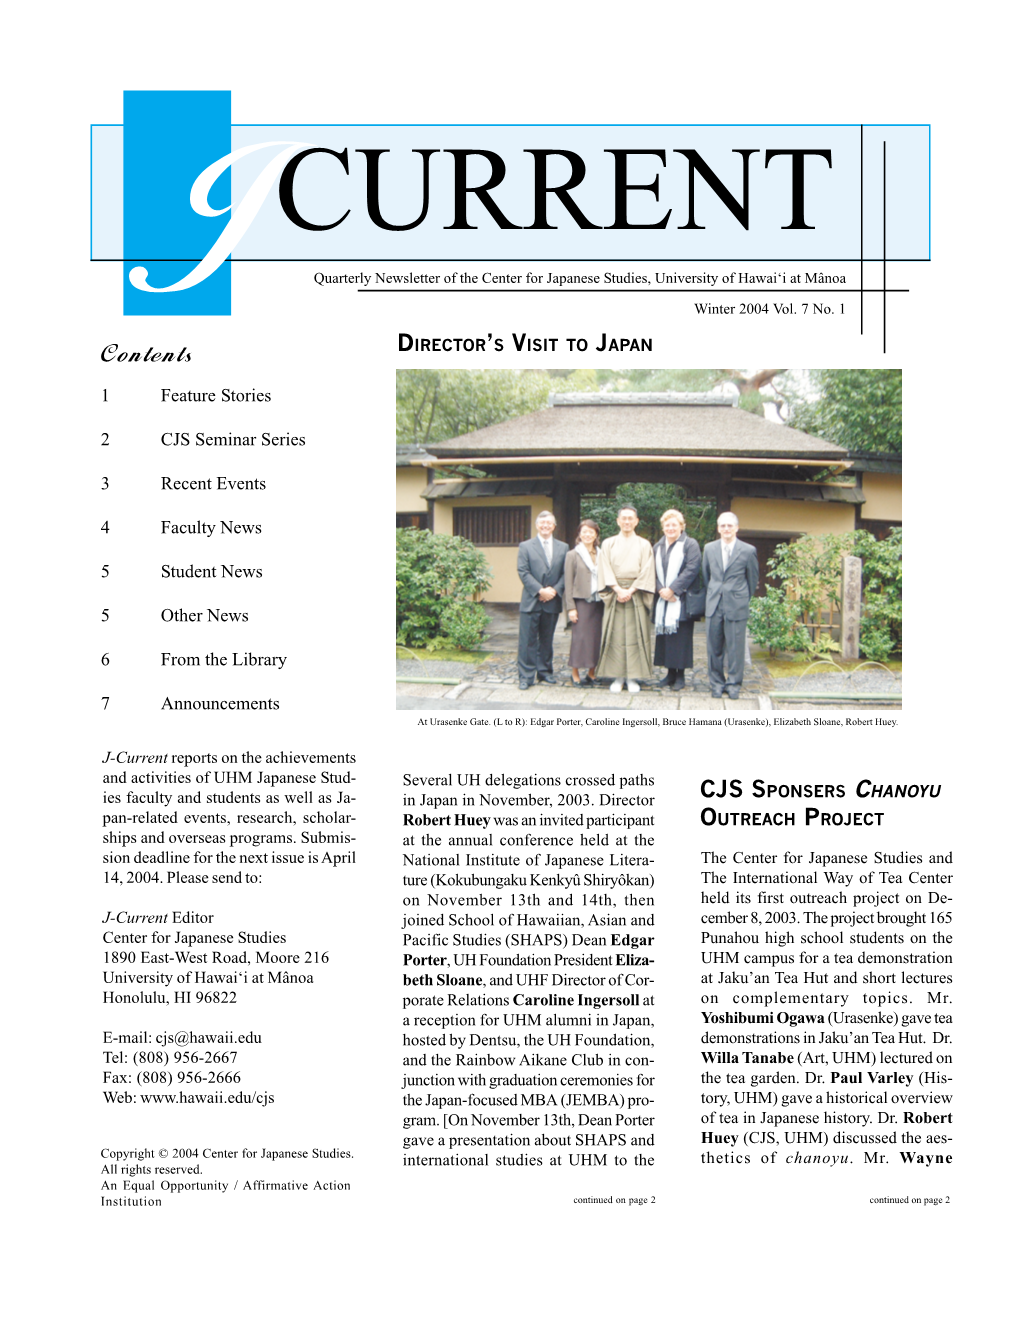 CURRENT J Quarterly Newsletter of the Center for Japanese Studies, University of Hawai‘I at Mânoa Winter 2004 Vol